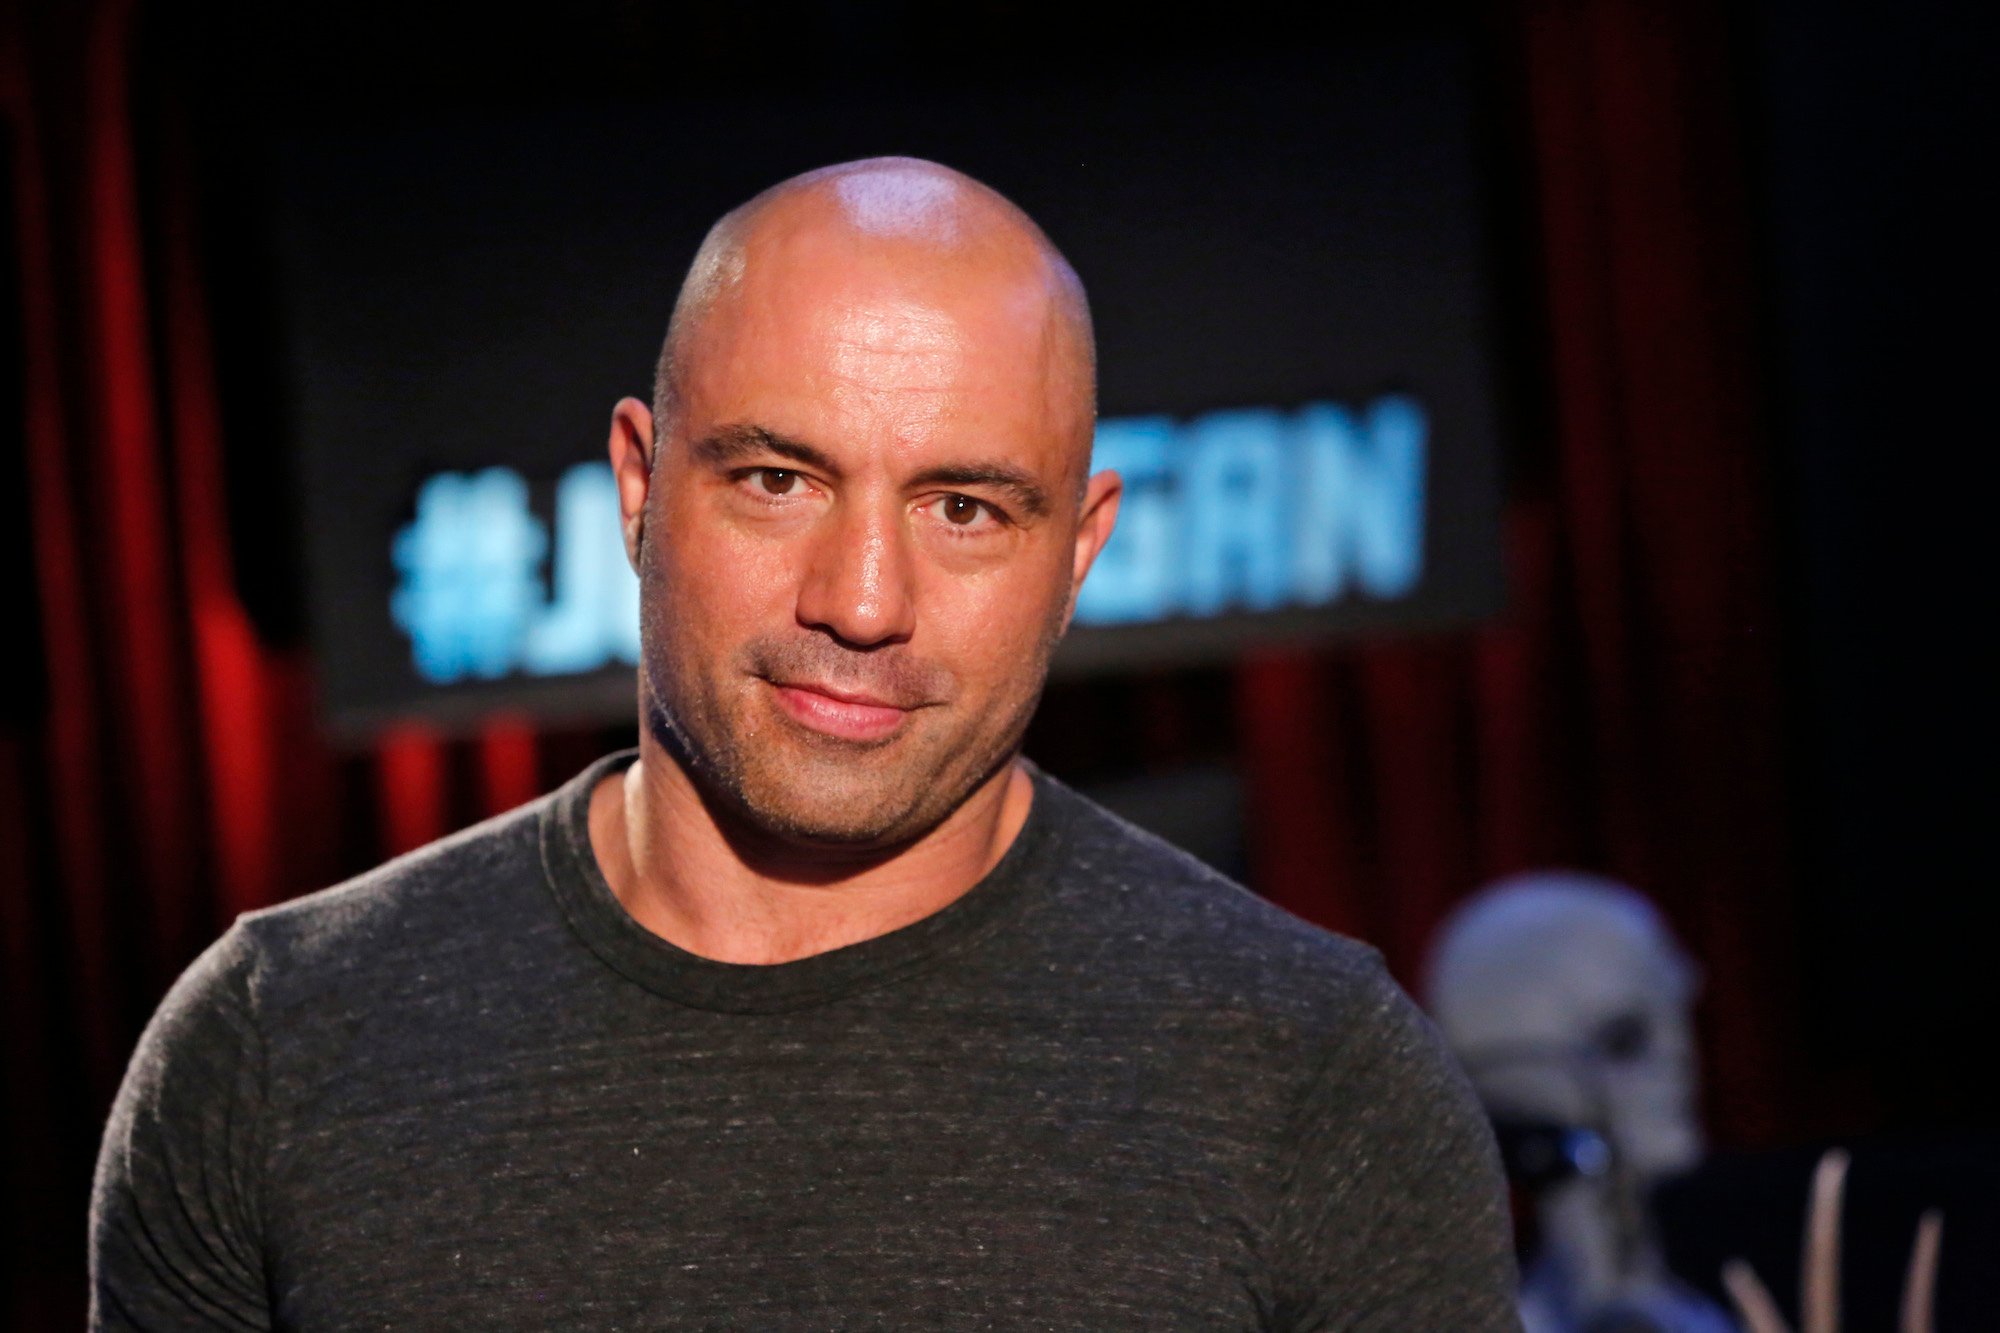 Joe Rogan smiling in front of a blurred background